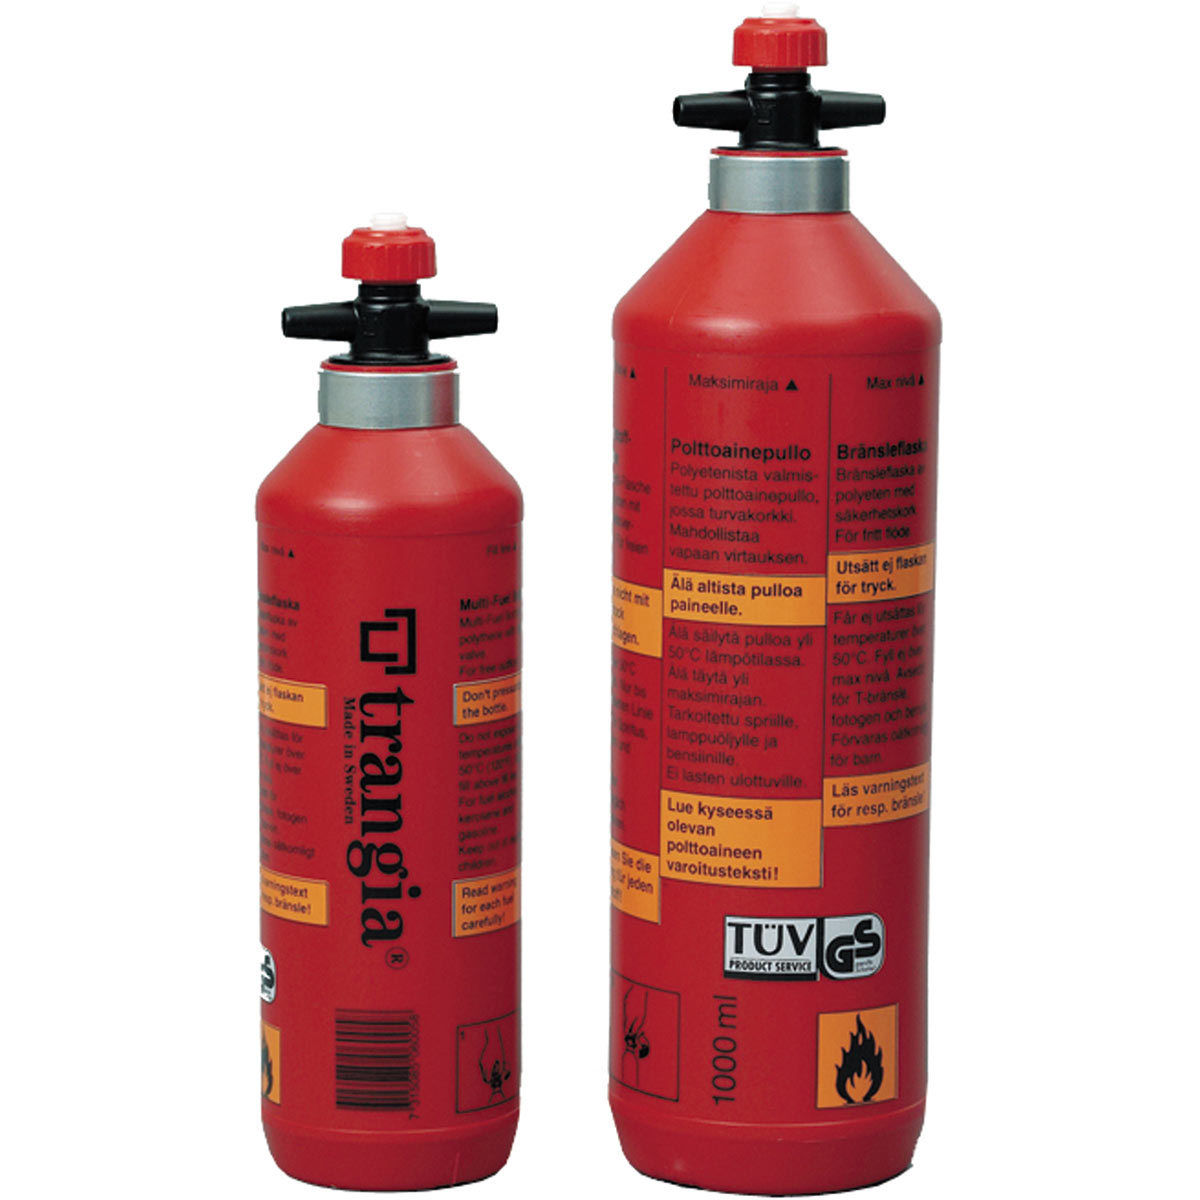 Trangia Fuel Bottles-0.3, 0.5 and 1L with Safety Valve - 0.3L